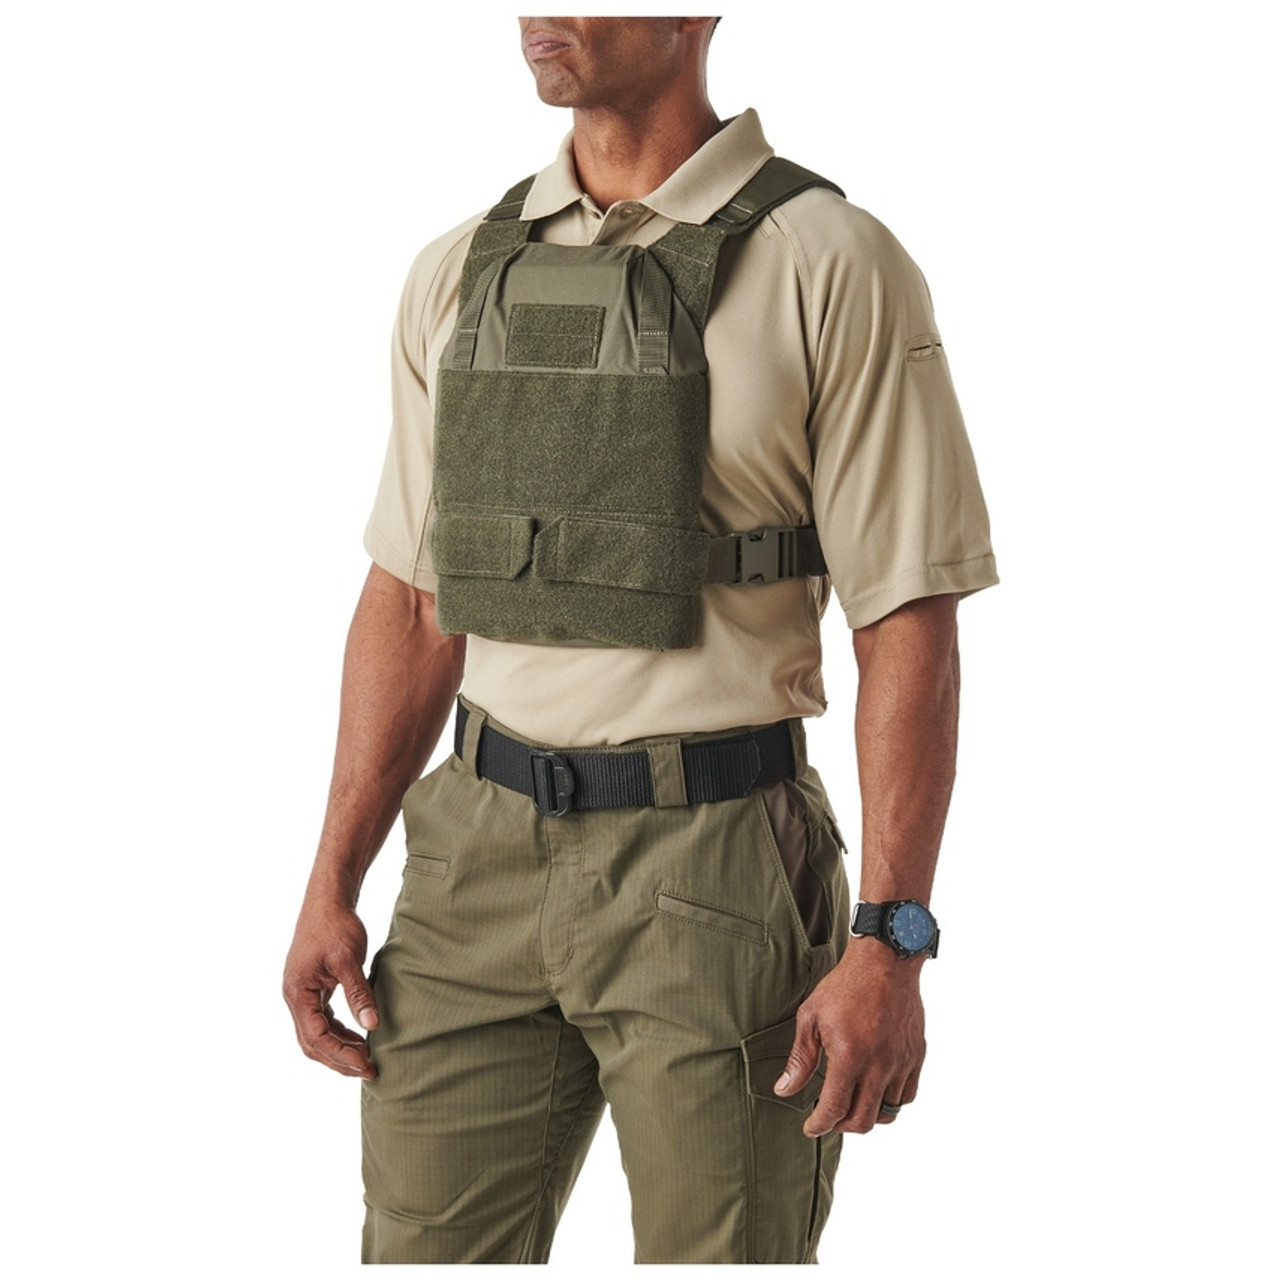 5.11 Tactical Low-Vis Collection